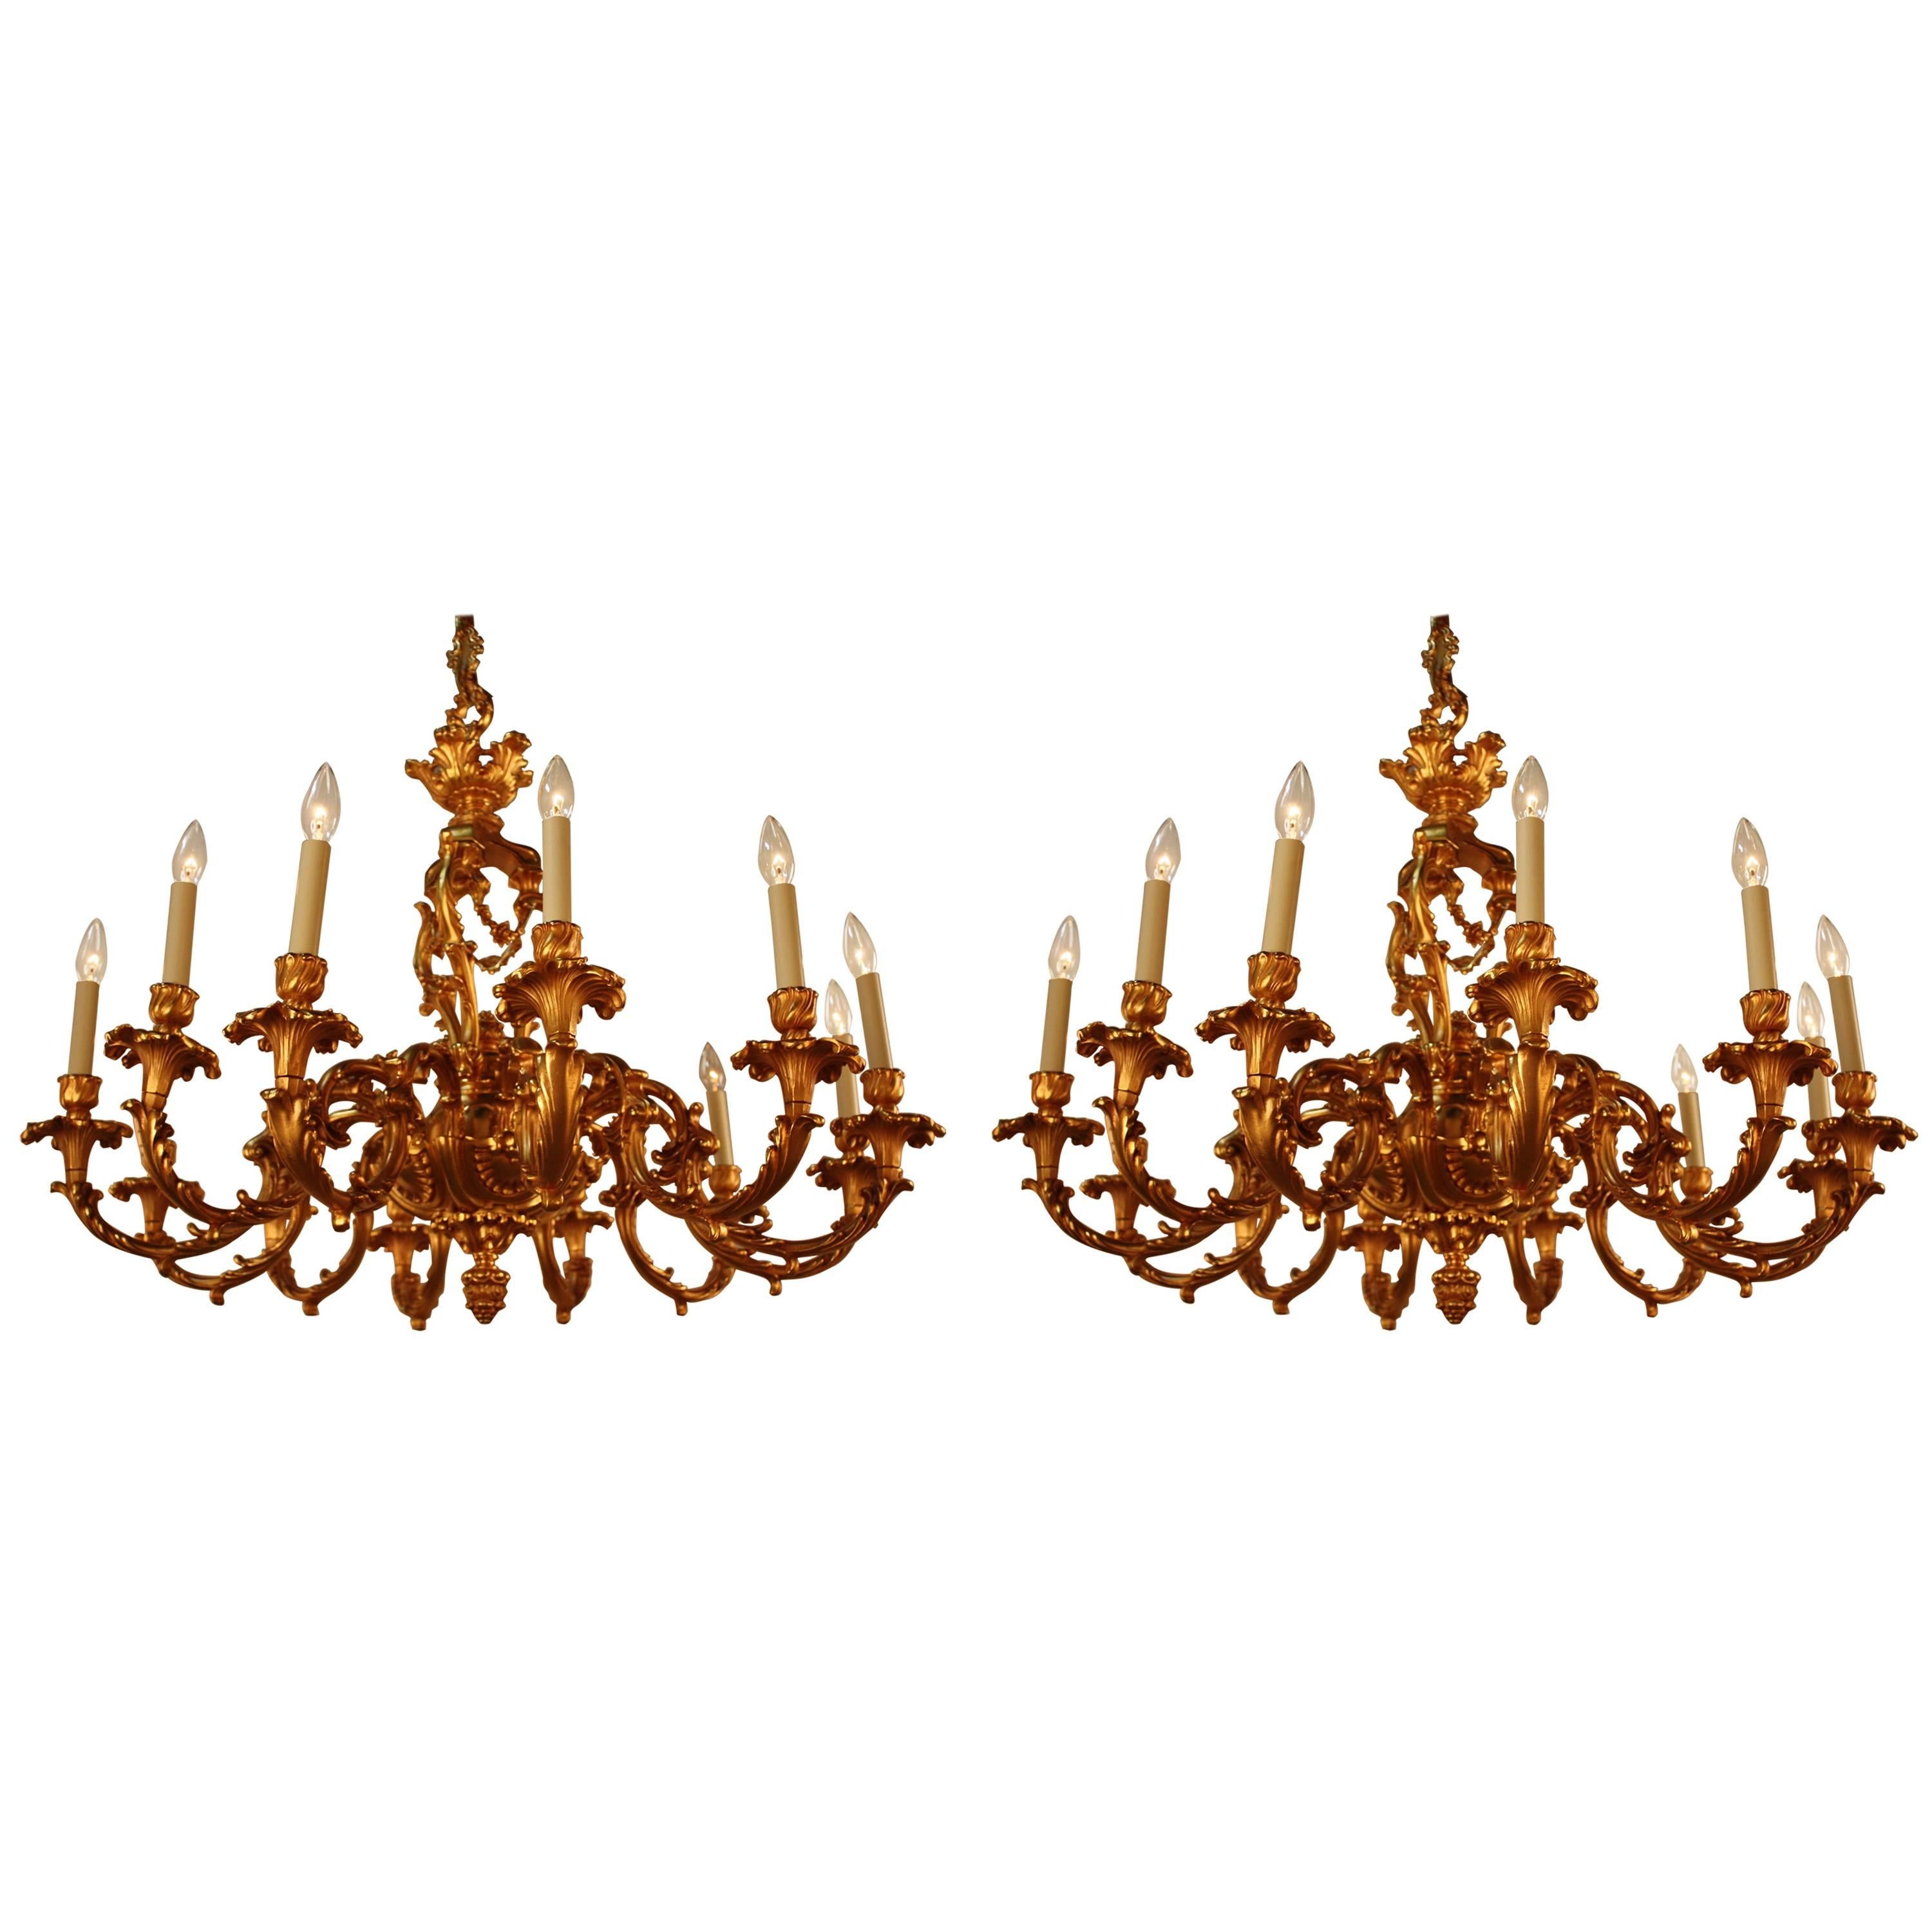 Pair of Louis XV Style French Doré Bronze Chandeliers